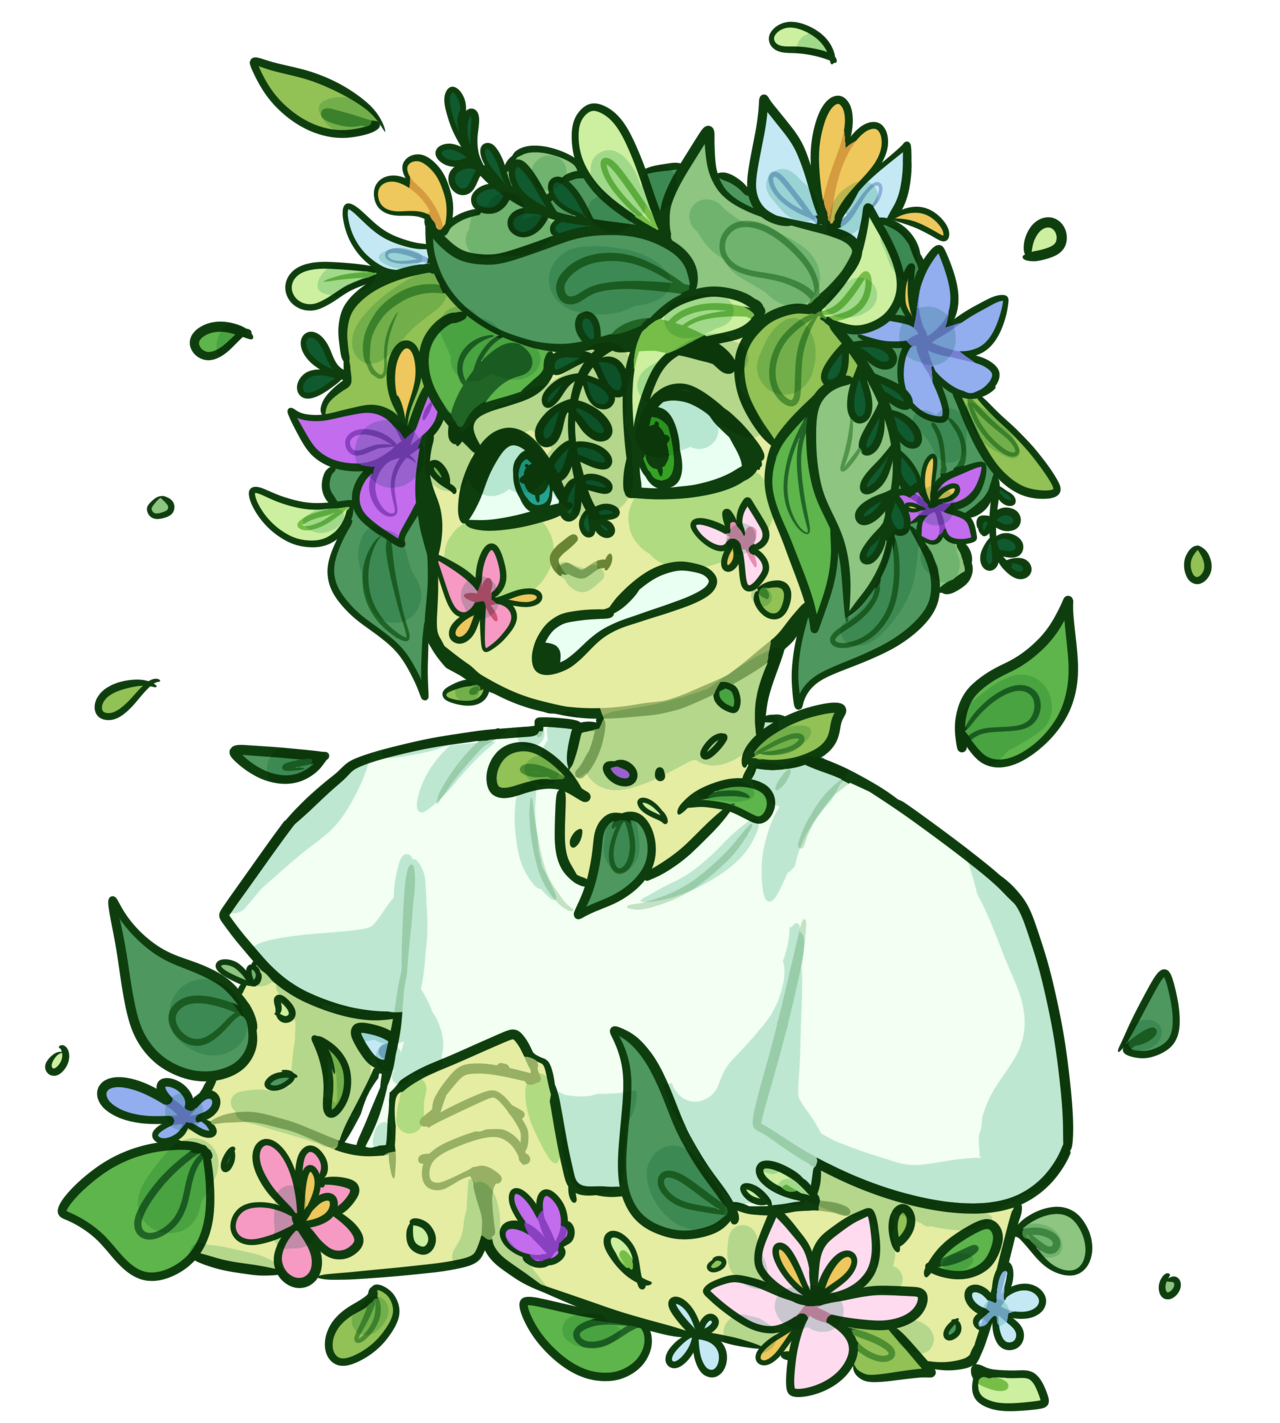 September 3, 2018. character design of a plant boy